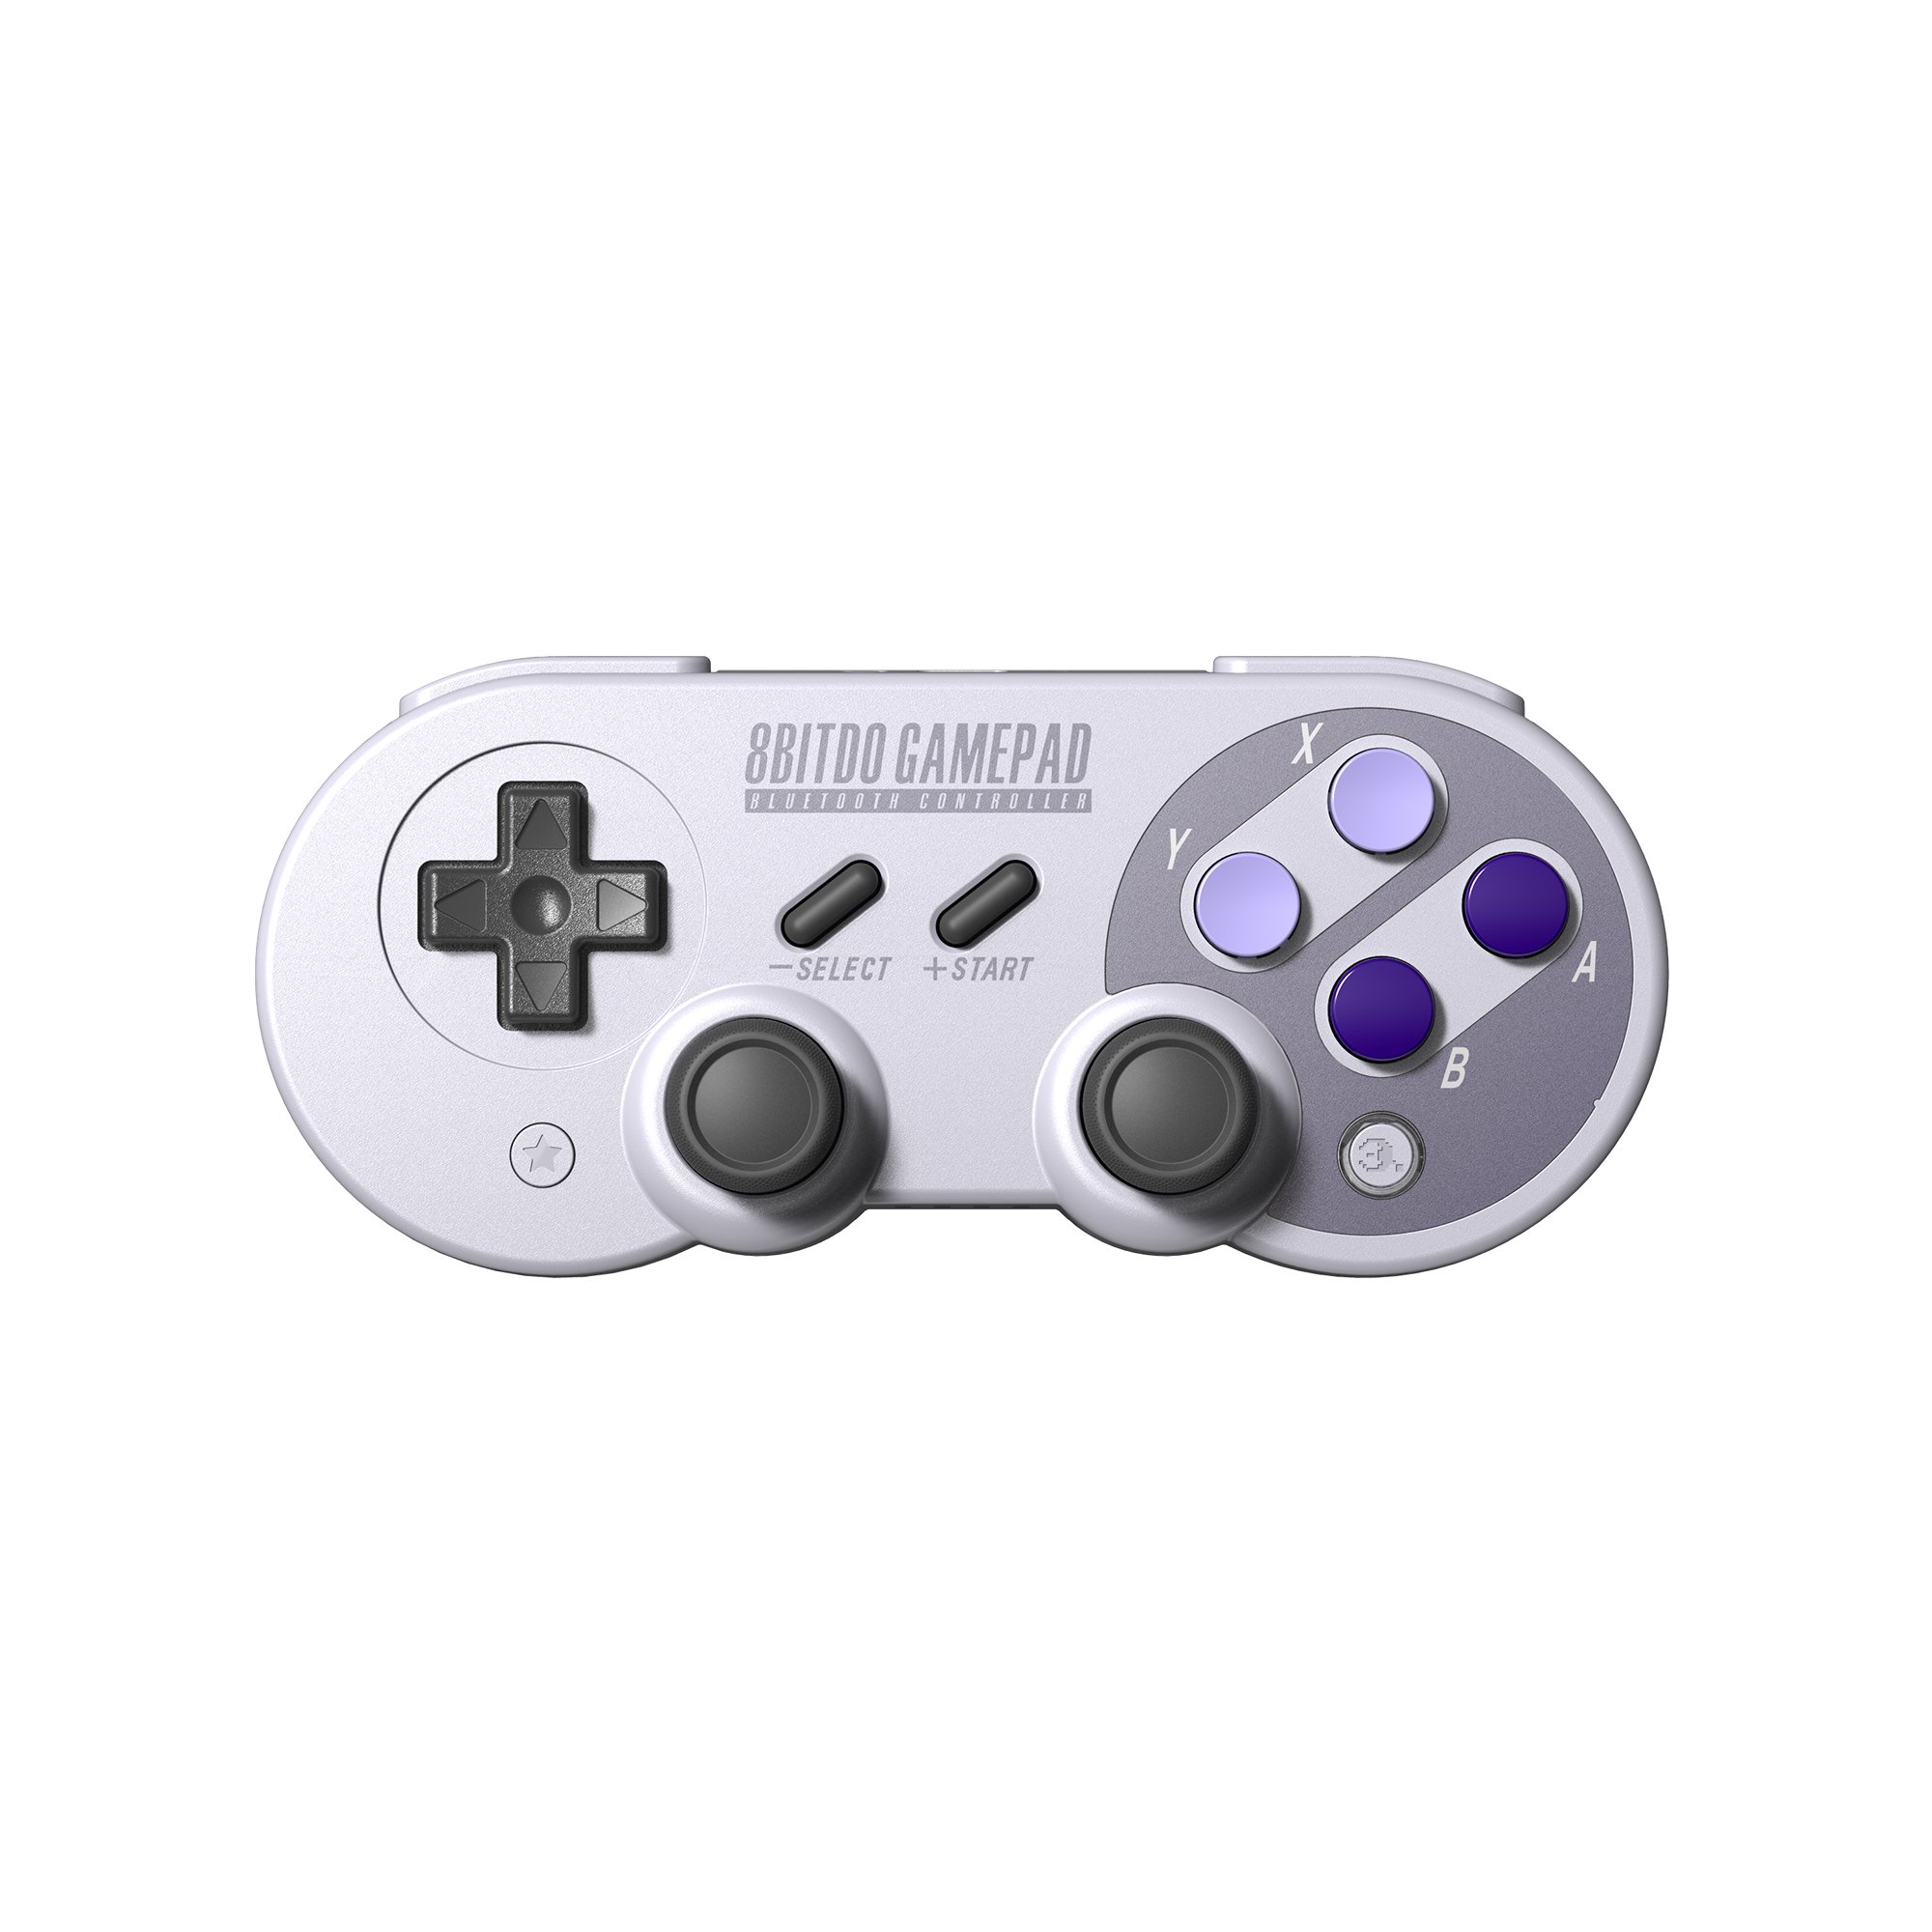 8bitdo ㆁᴗㆁ Our Sn30 Pro Has A Dedicated Home Button And A Special Star Button For Activating A Button S Turbo Mode T Co Jvqdxzowep Twitter